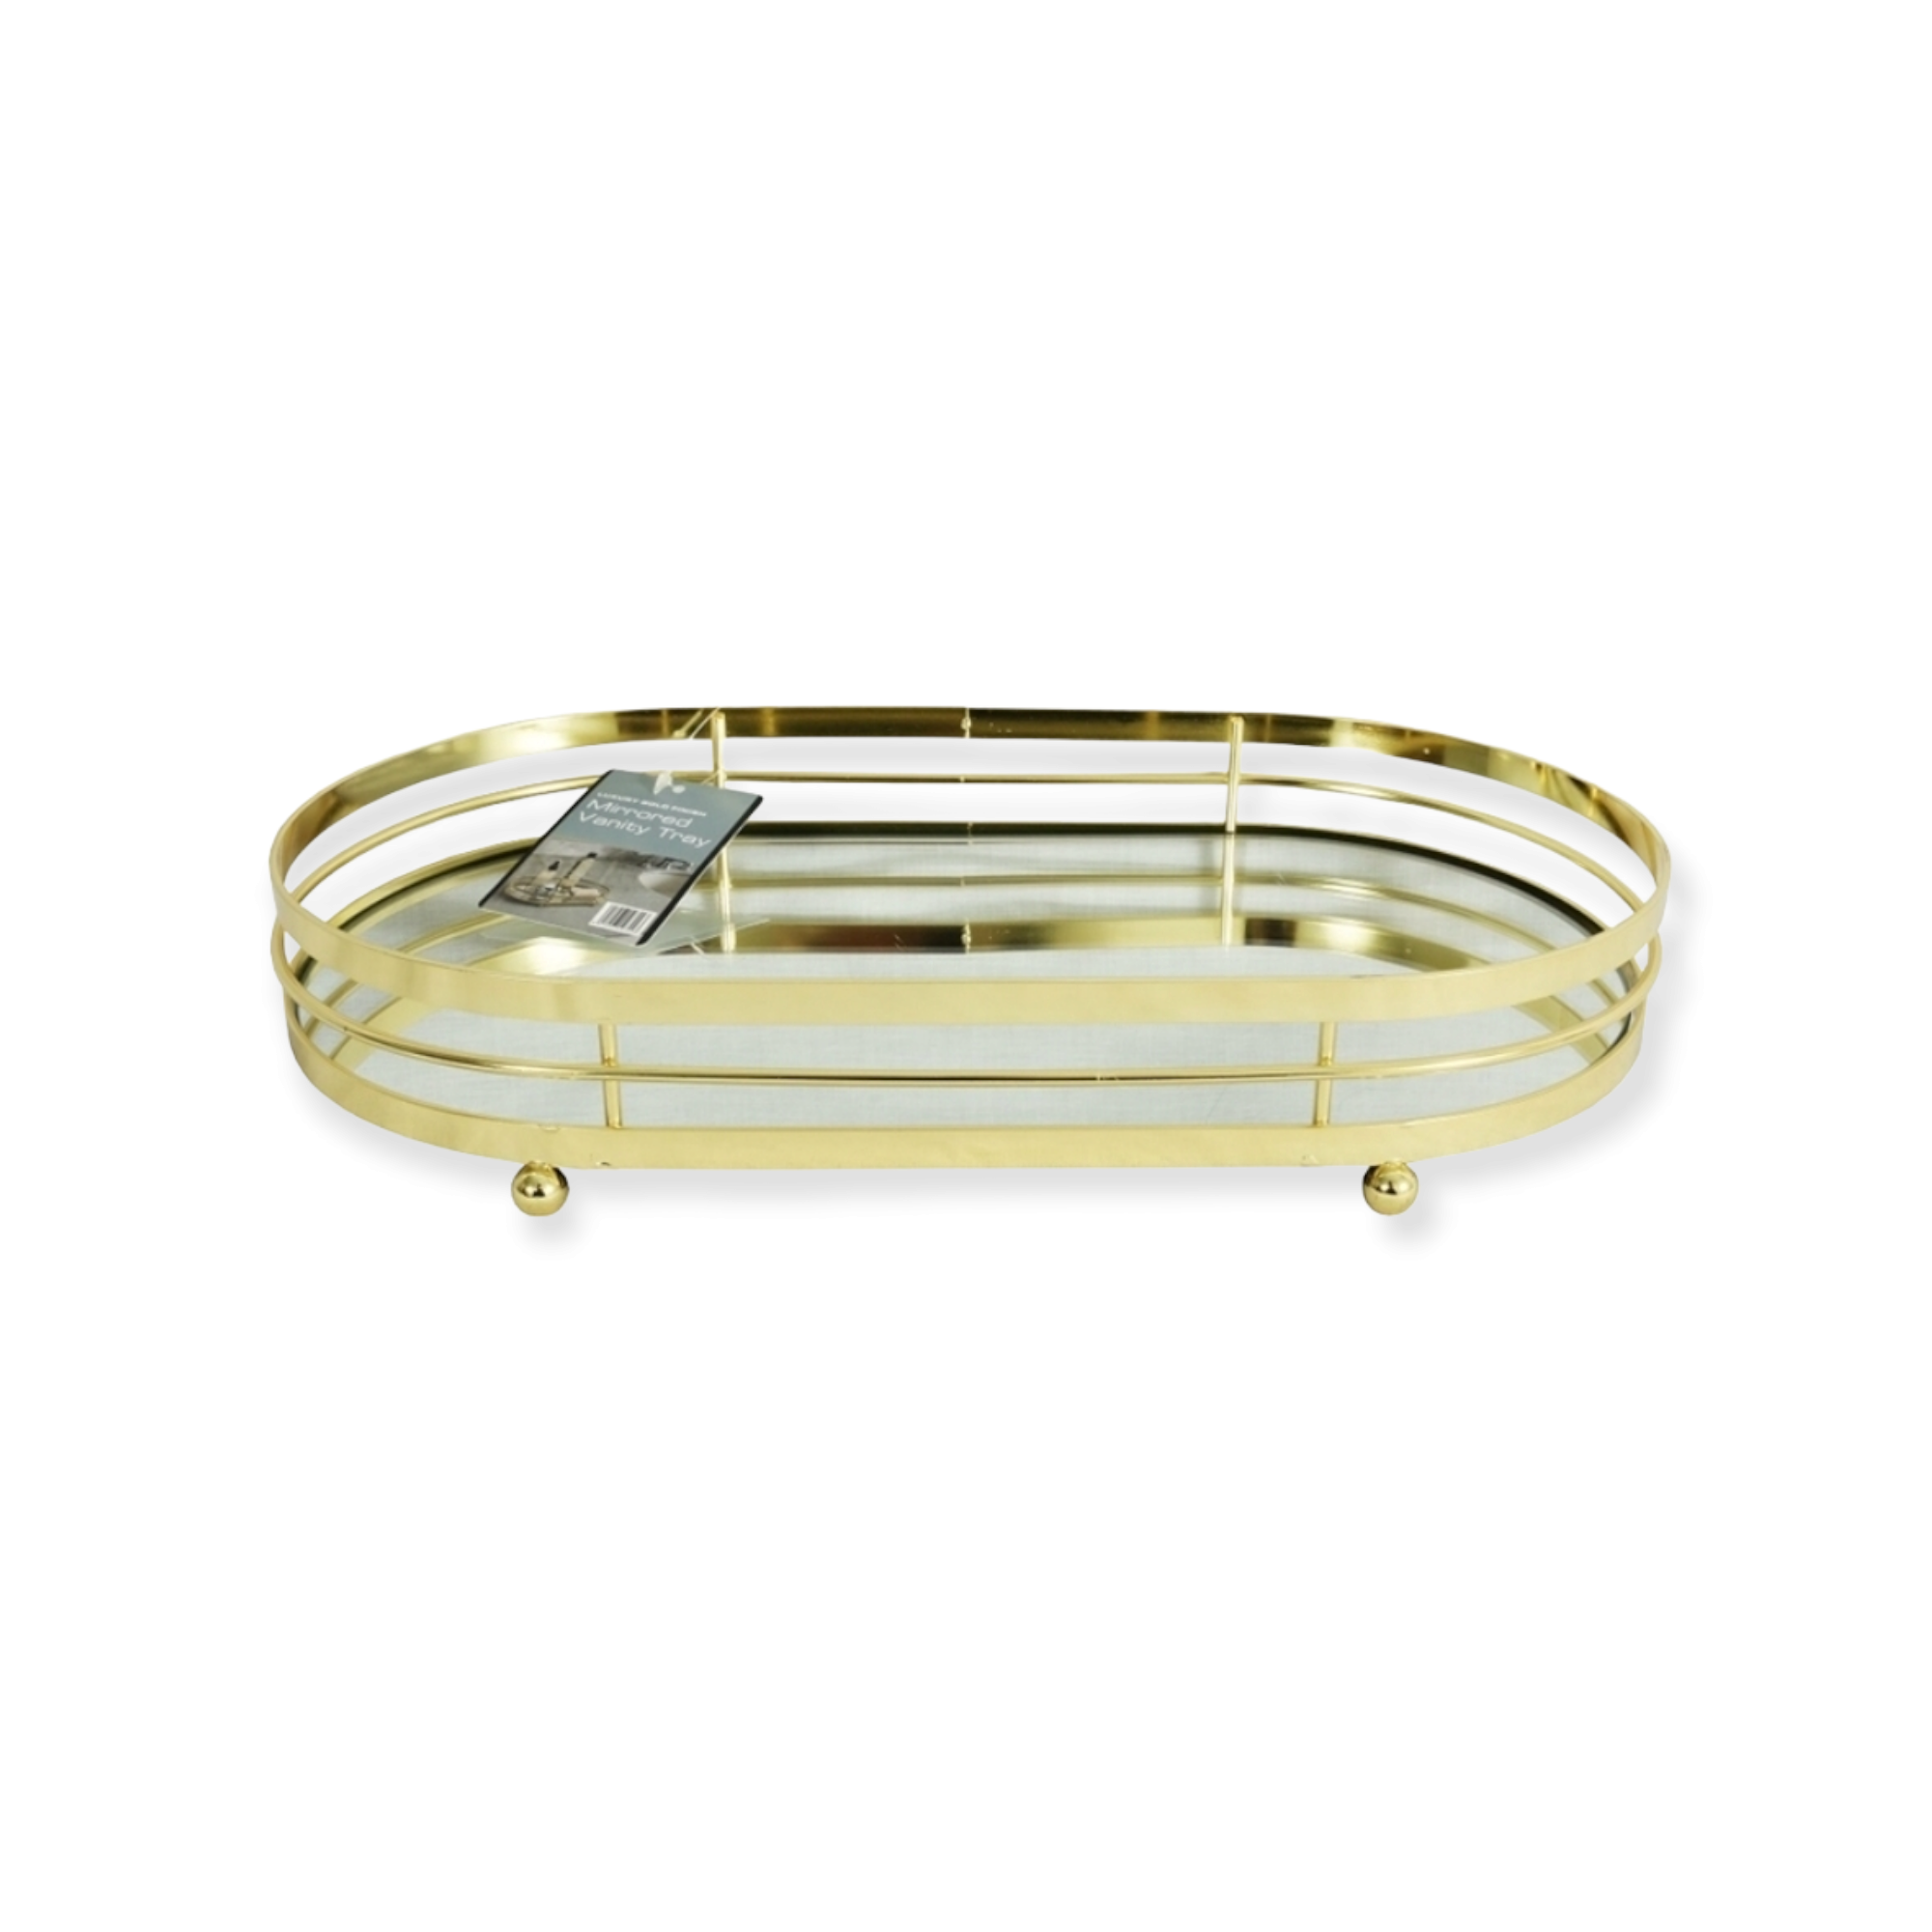 Mirror Tray 1 Tier Gold Plate with Handle Round 10722